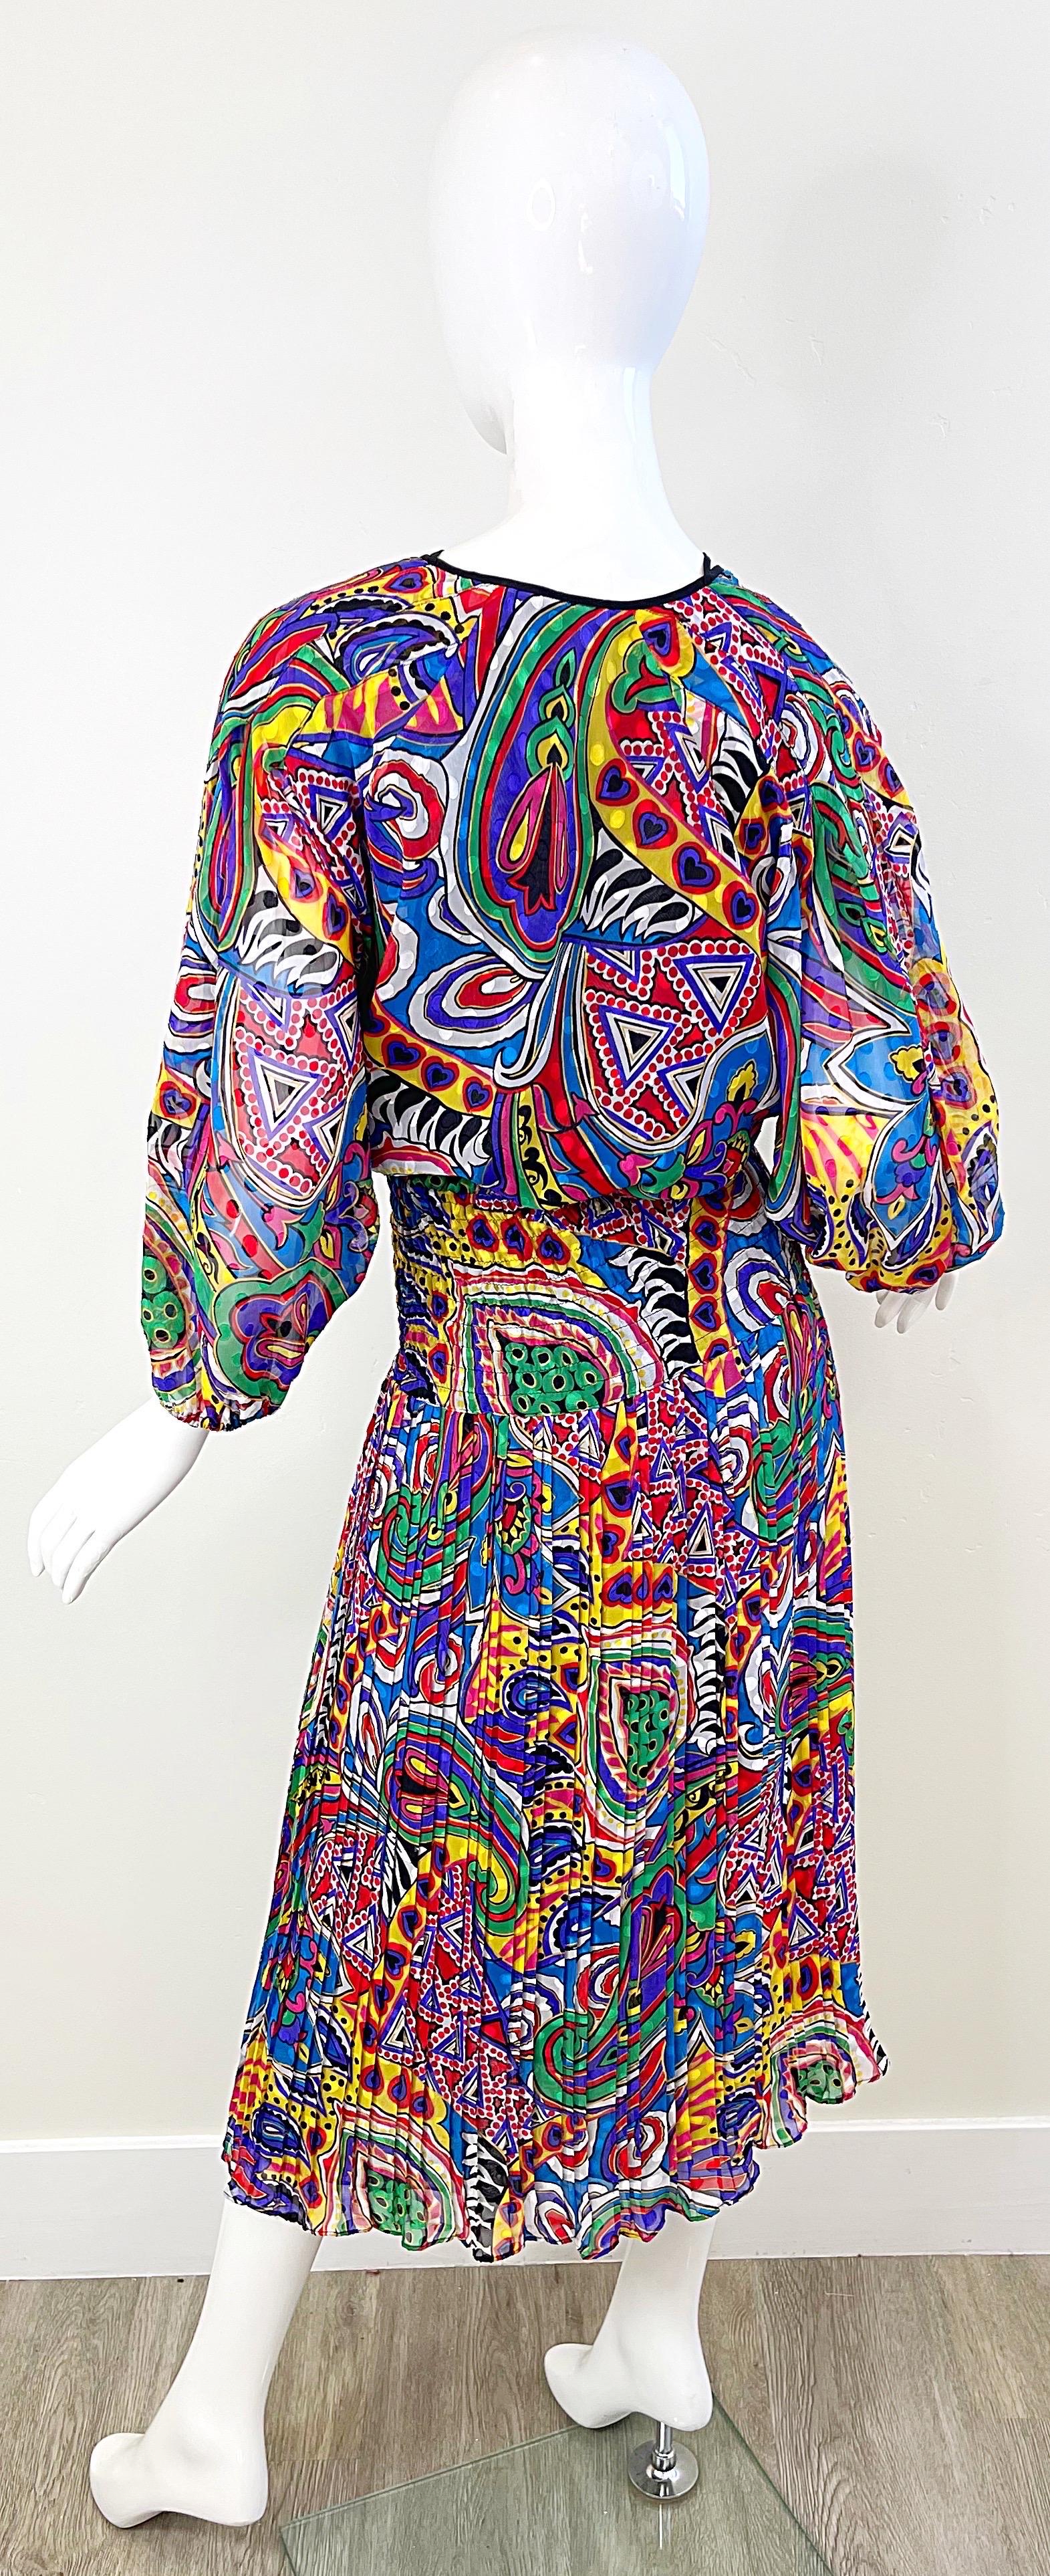 Diane Freis 1980s Novelty Heart Paisley Psychedelic Print Vintage 80s Dress For Sale 8